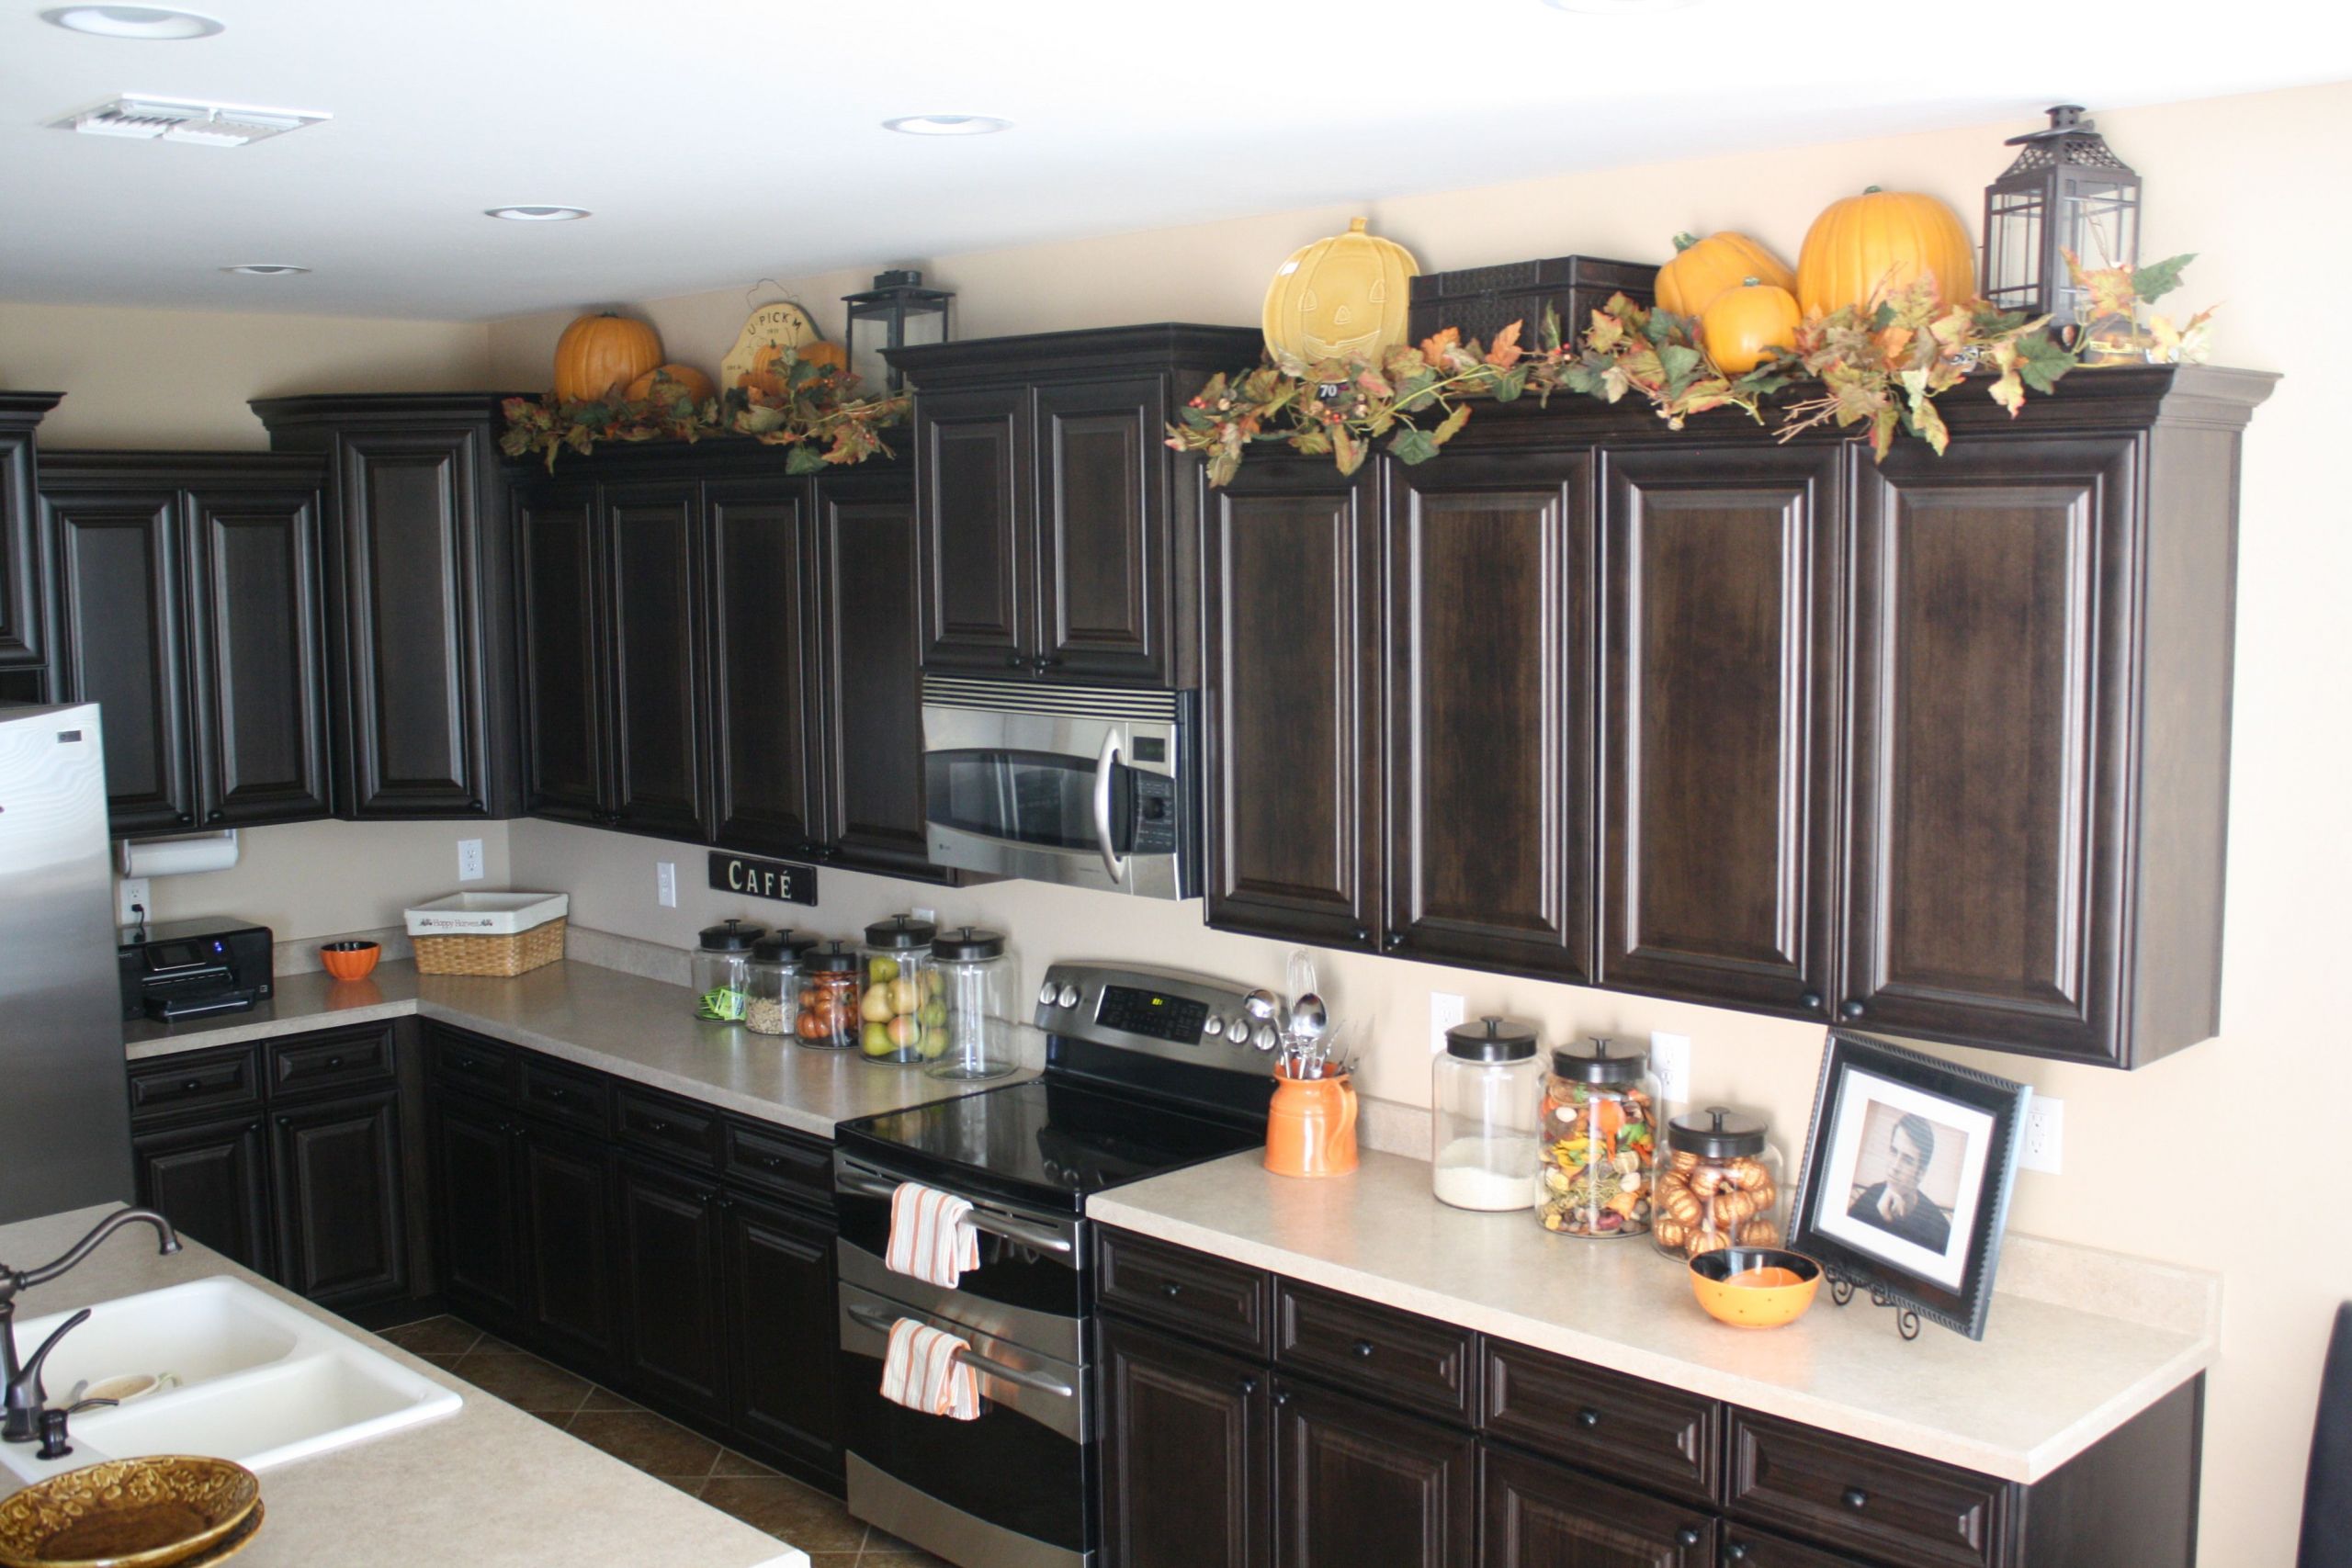 Top Of Kitchen Cabinet Decorations Fresh An Idea to Decorate On top Kitchen Cabinets for Fall